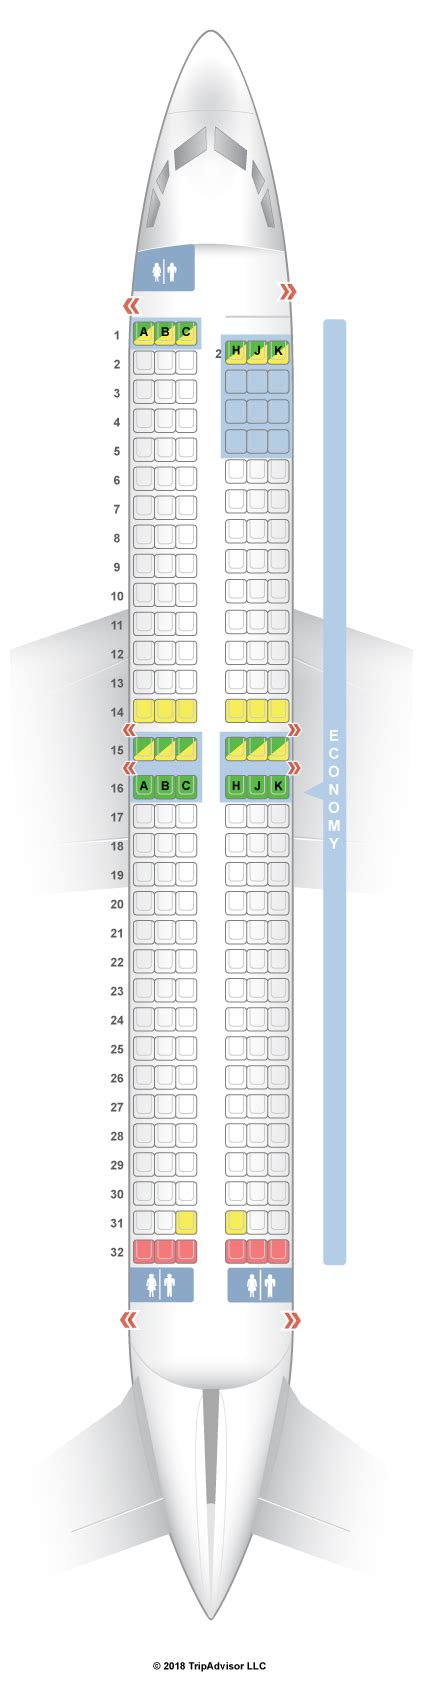 Air Transat A330 Seat Map Seat Map Srilankan Airlines Airbus A330 200